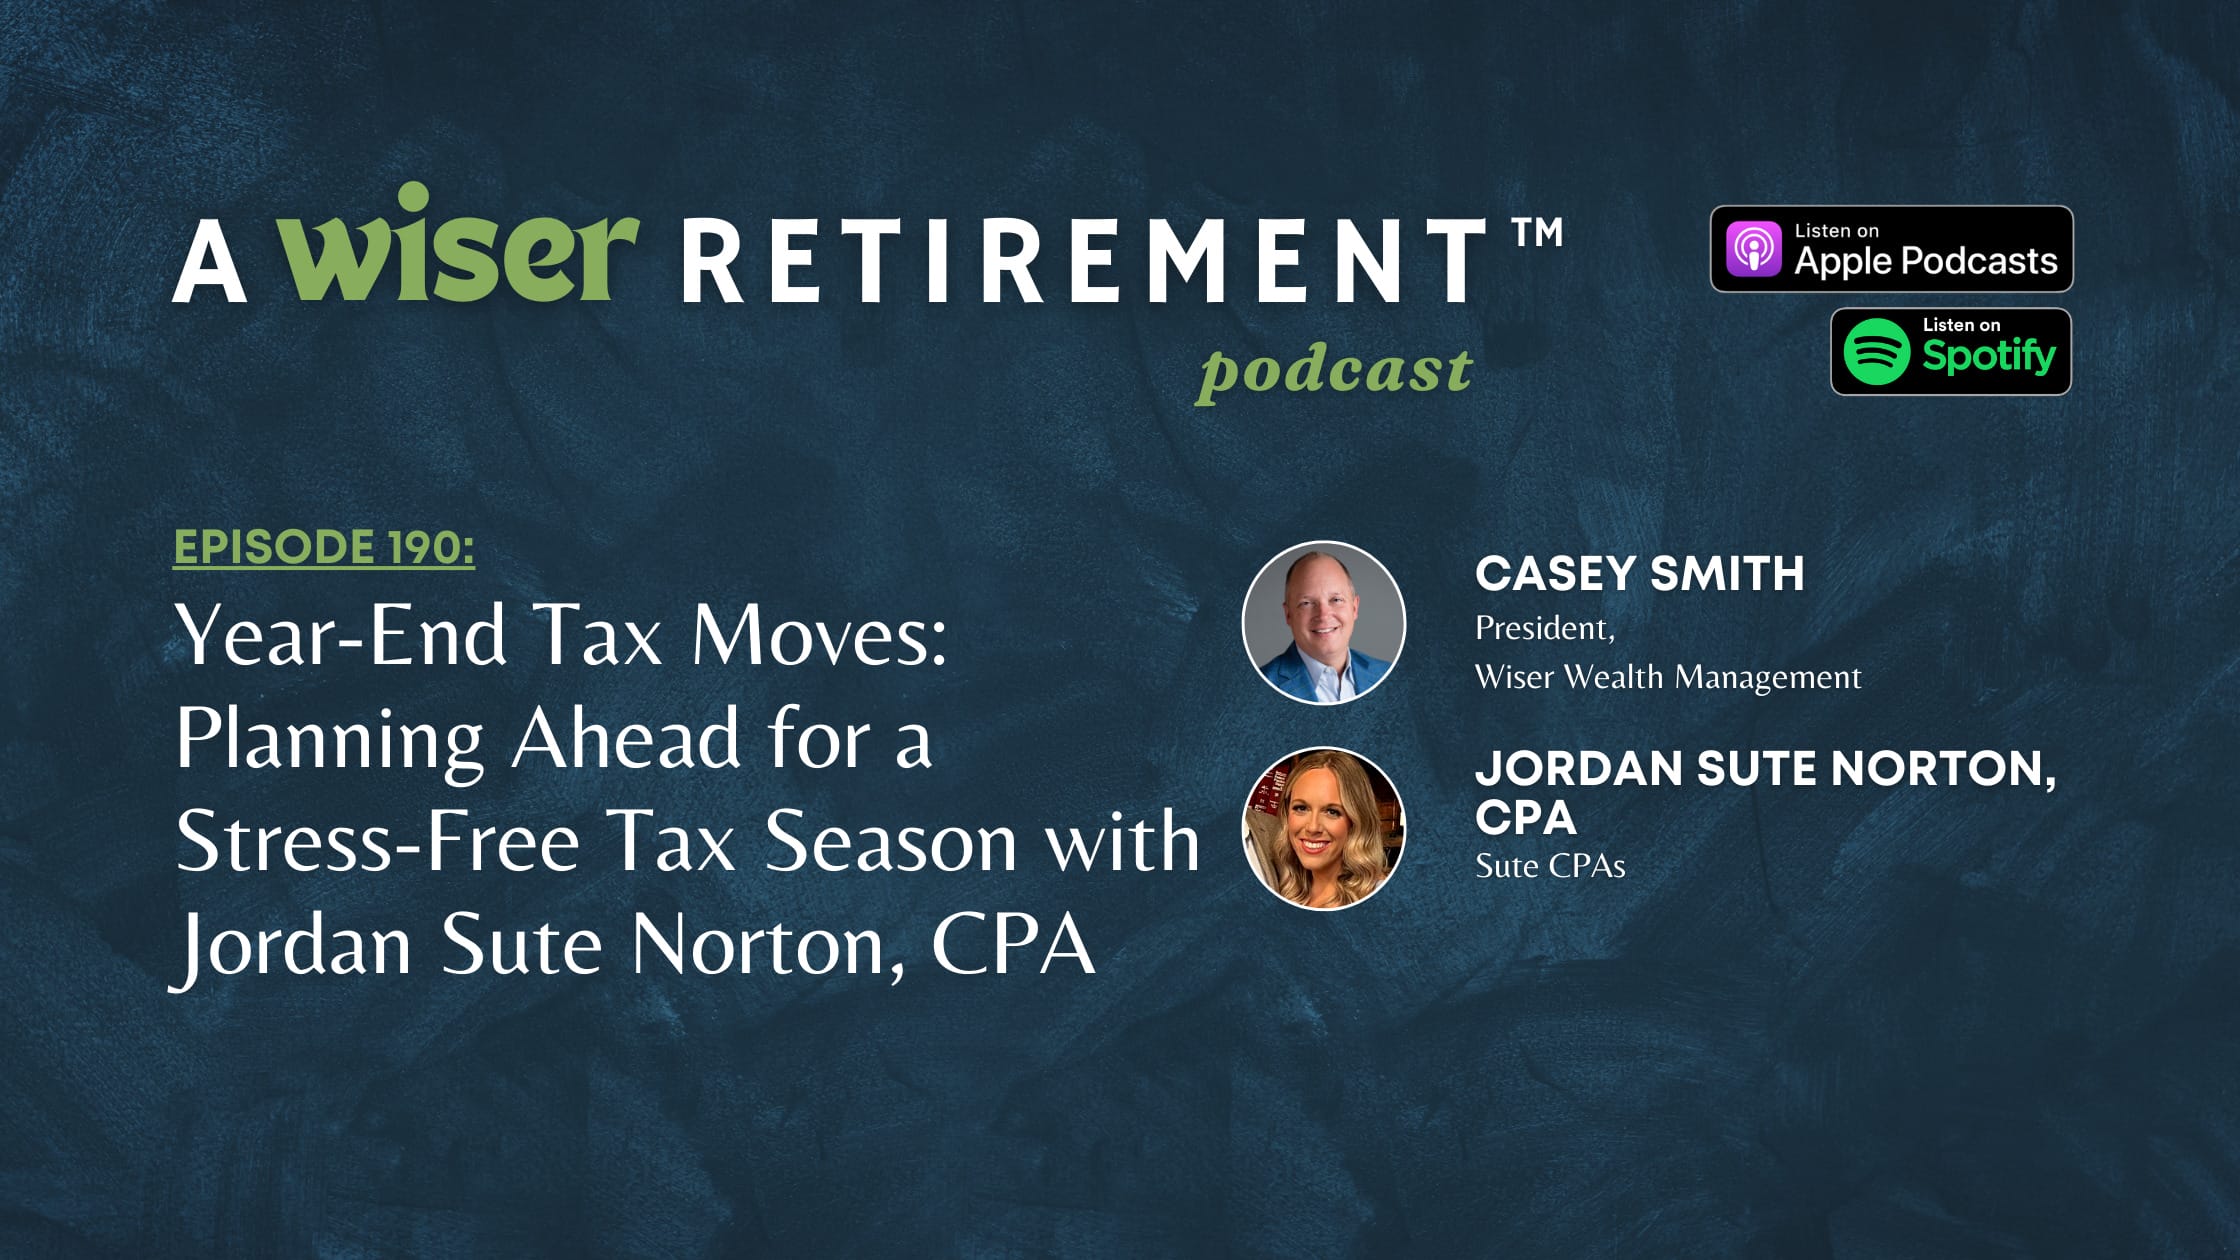 Year-End Tax Moves: Planning Ahead for a Stress-Free Tax Season with Jordan Sute Norton, CPA